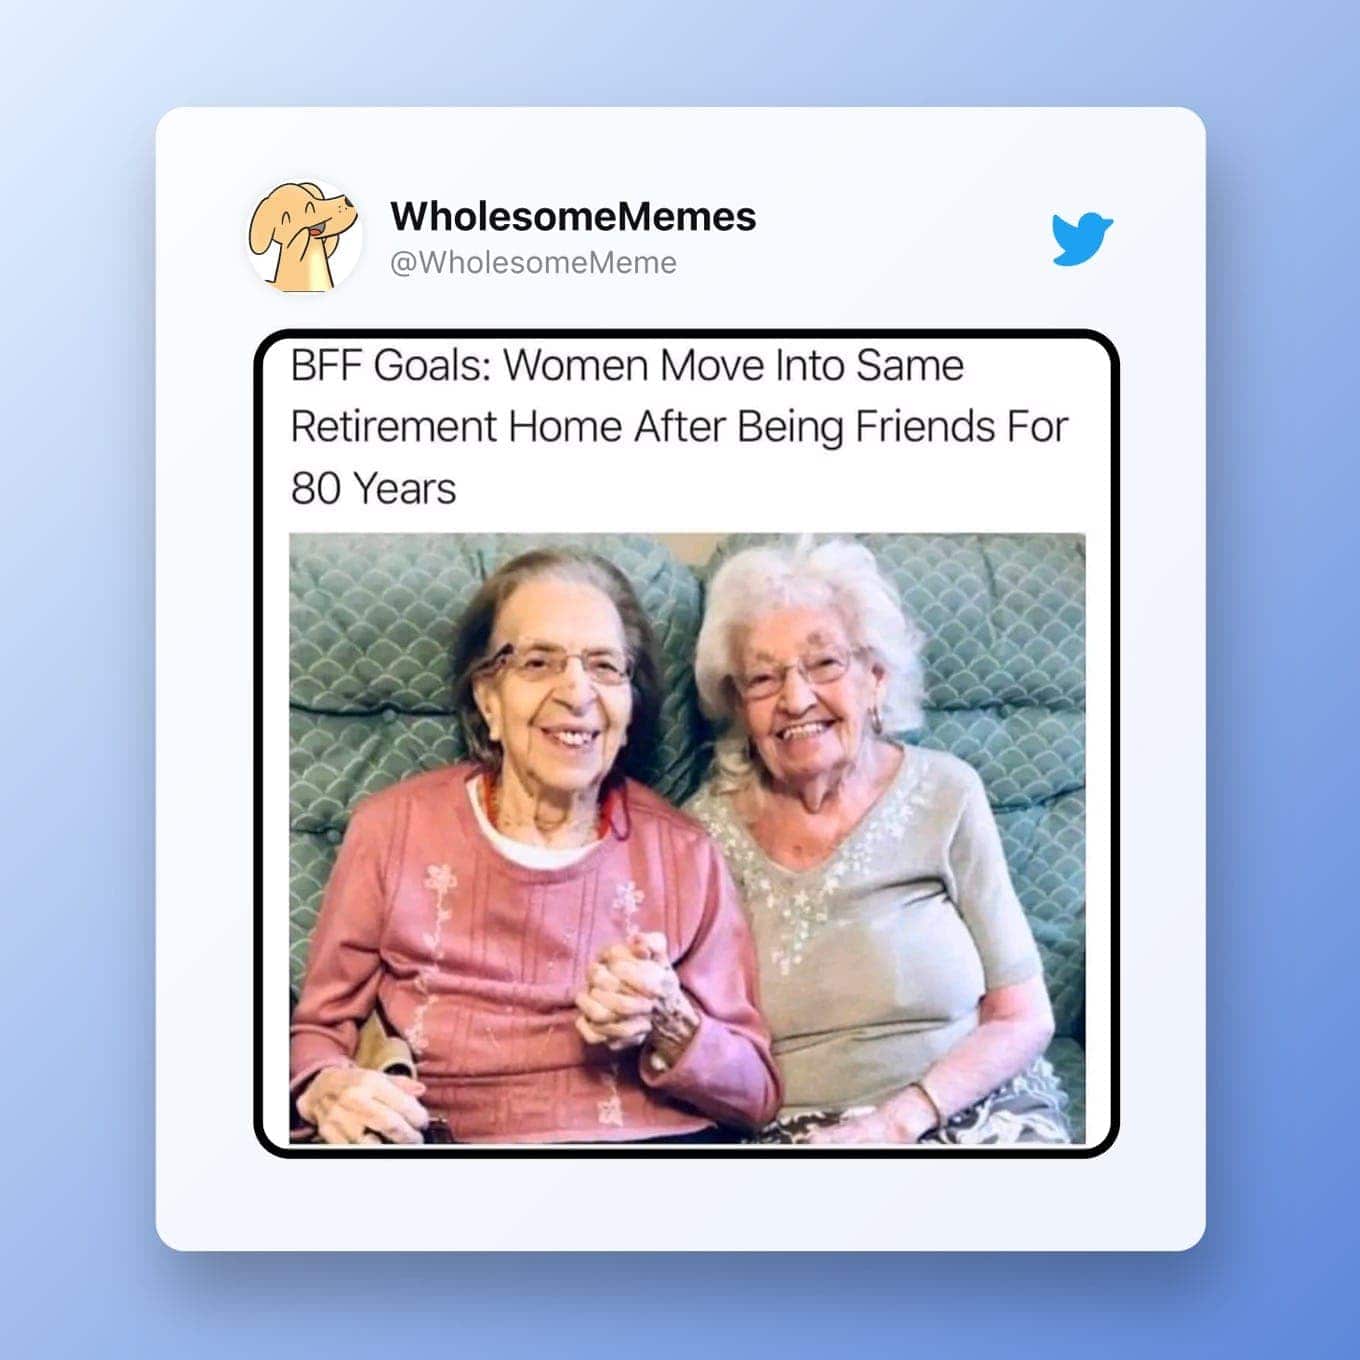 Wholesome Meme: BFF Goals: Women move into the same retirement home after being friends for 80 years